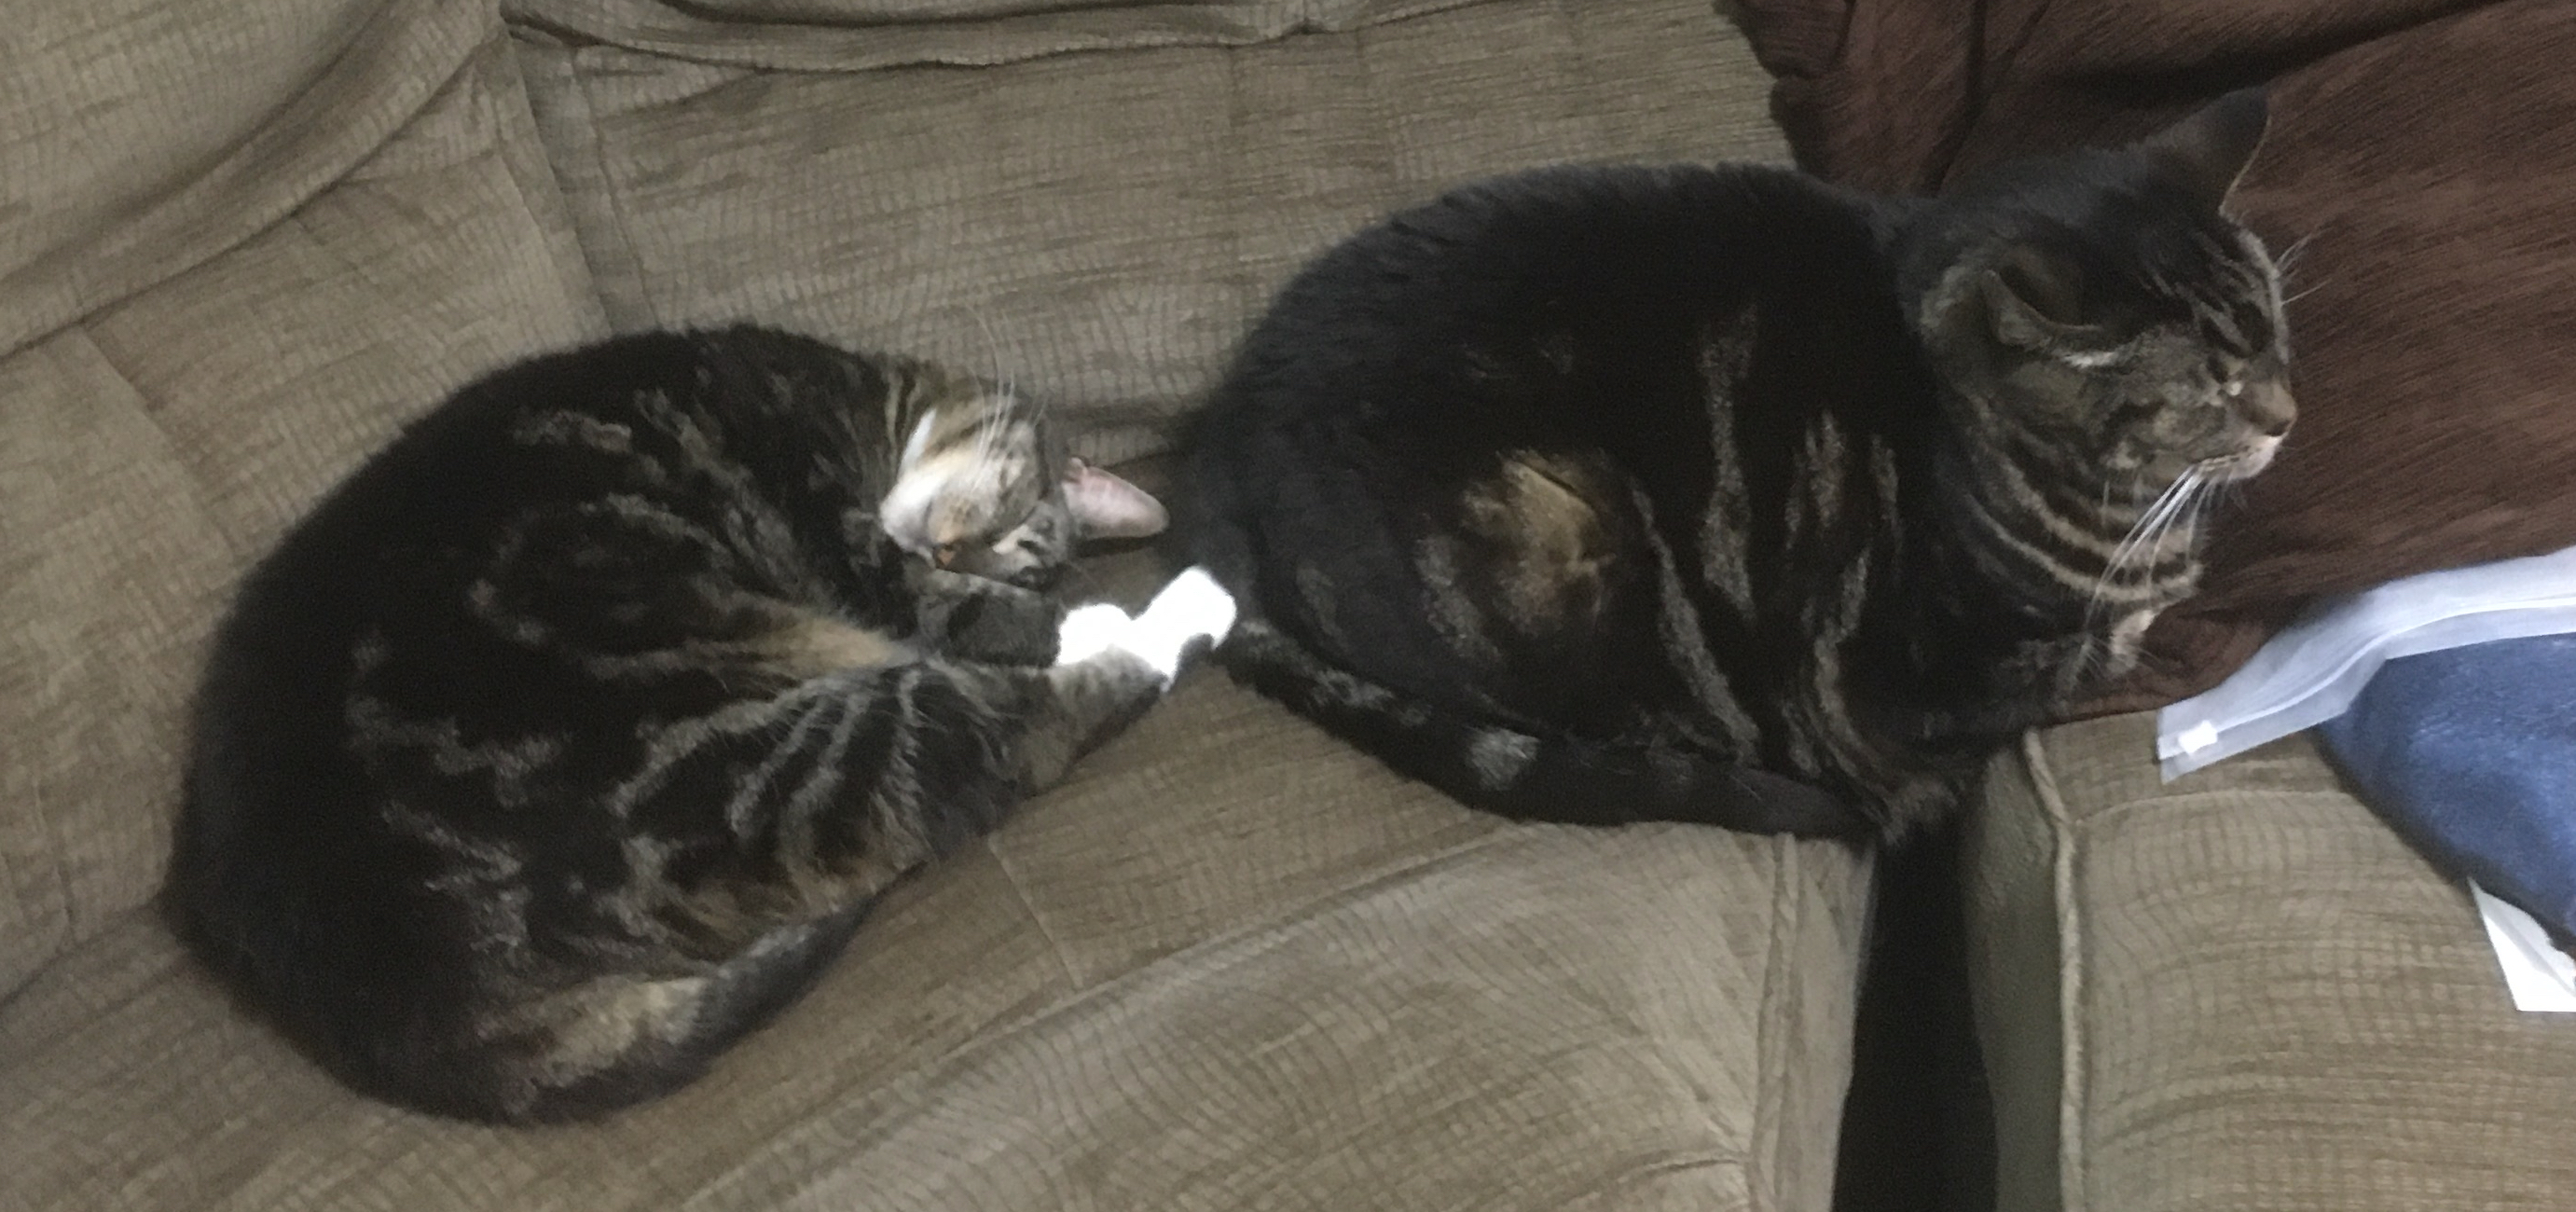 My parents two cats sat on a brown/grey sofa. Muffin on the left is curled into a ball. She is mostly black and brown but has white paws and chin. She has some paws extended. Buster on the right is sat staigh on his paws. He is also black and brown. He is lying across a 2 inch gap between two sofa segments